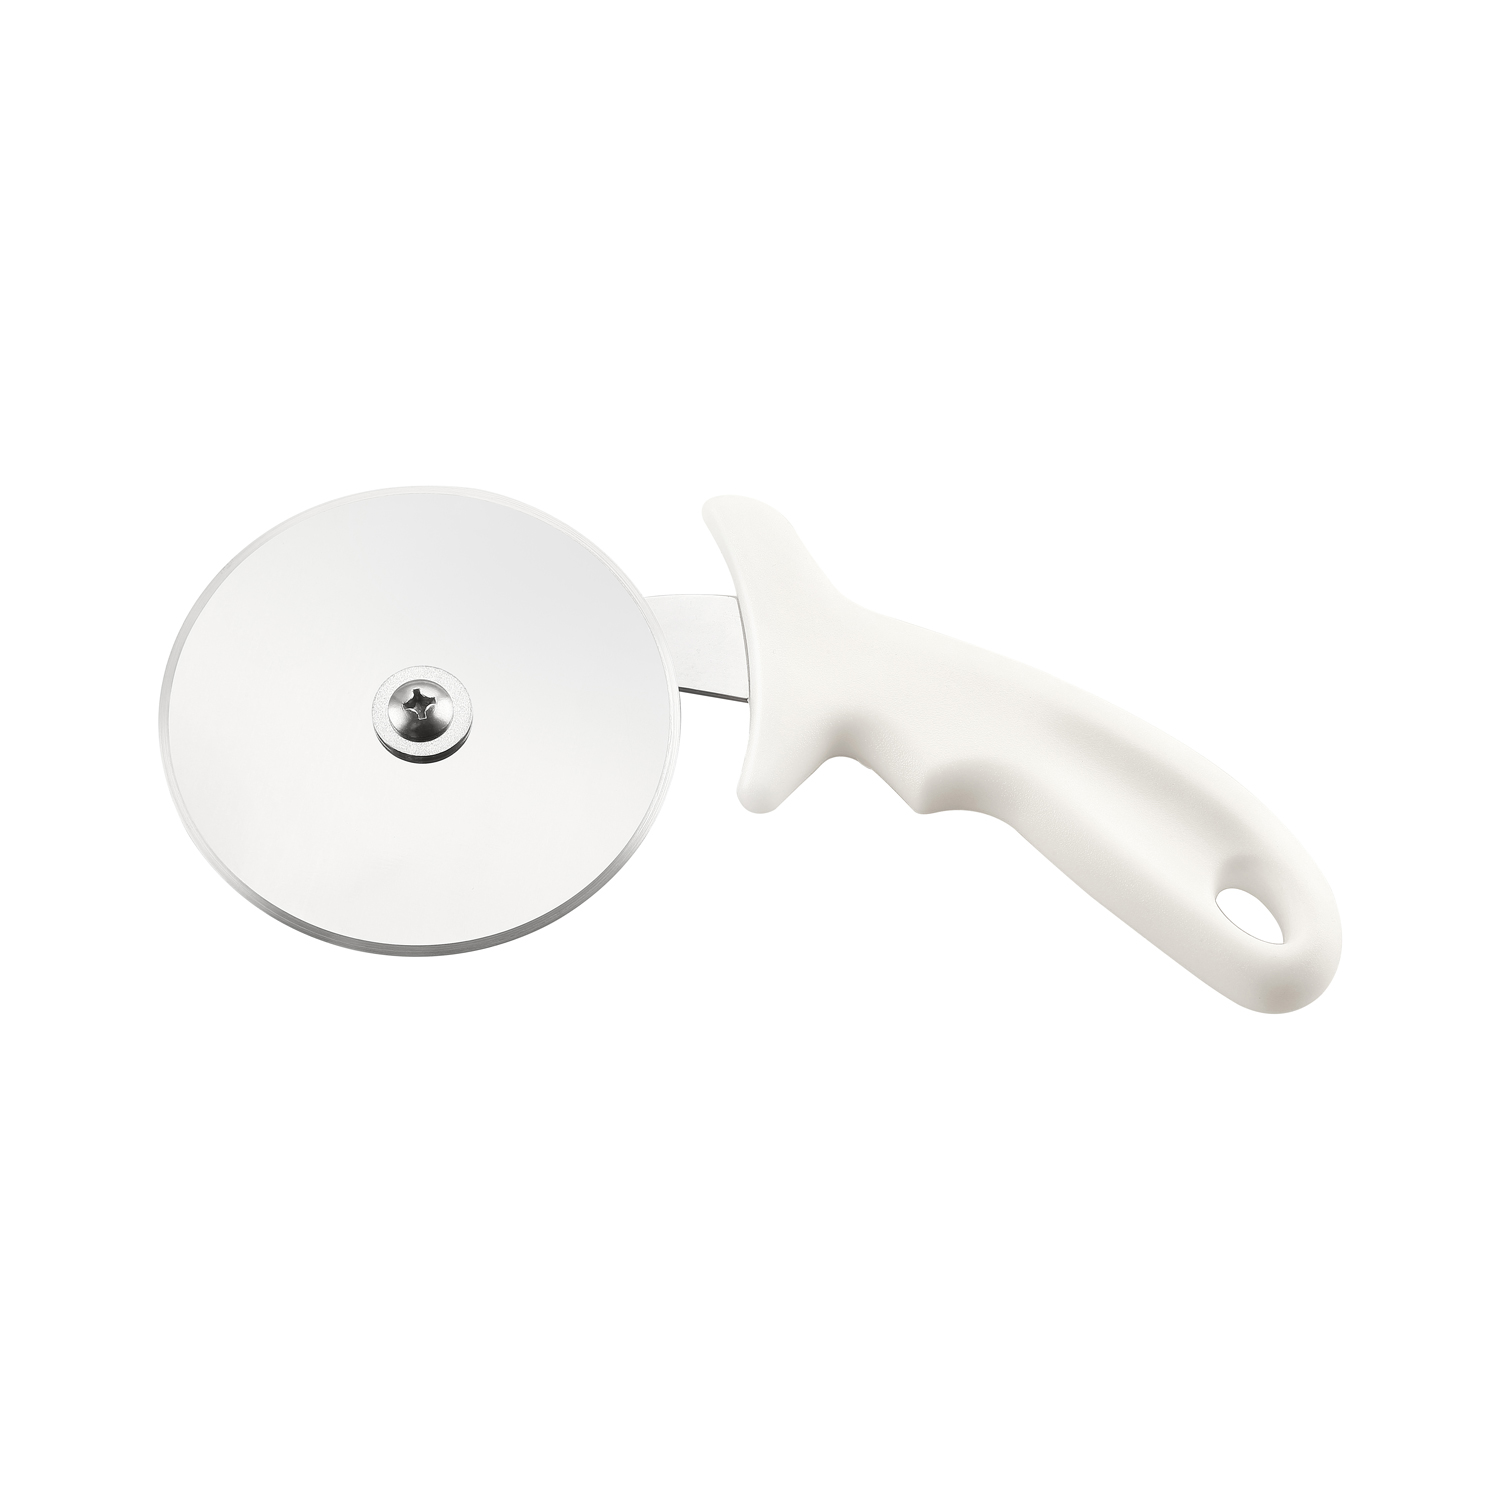 CAC China B15PZ-4W Pizza Cutter with White Handle 4" Dia